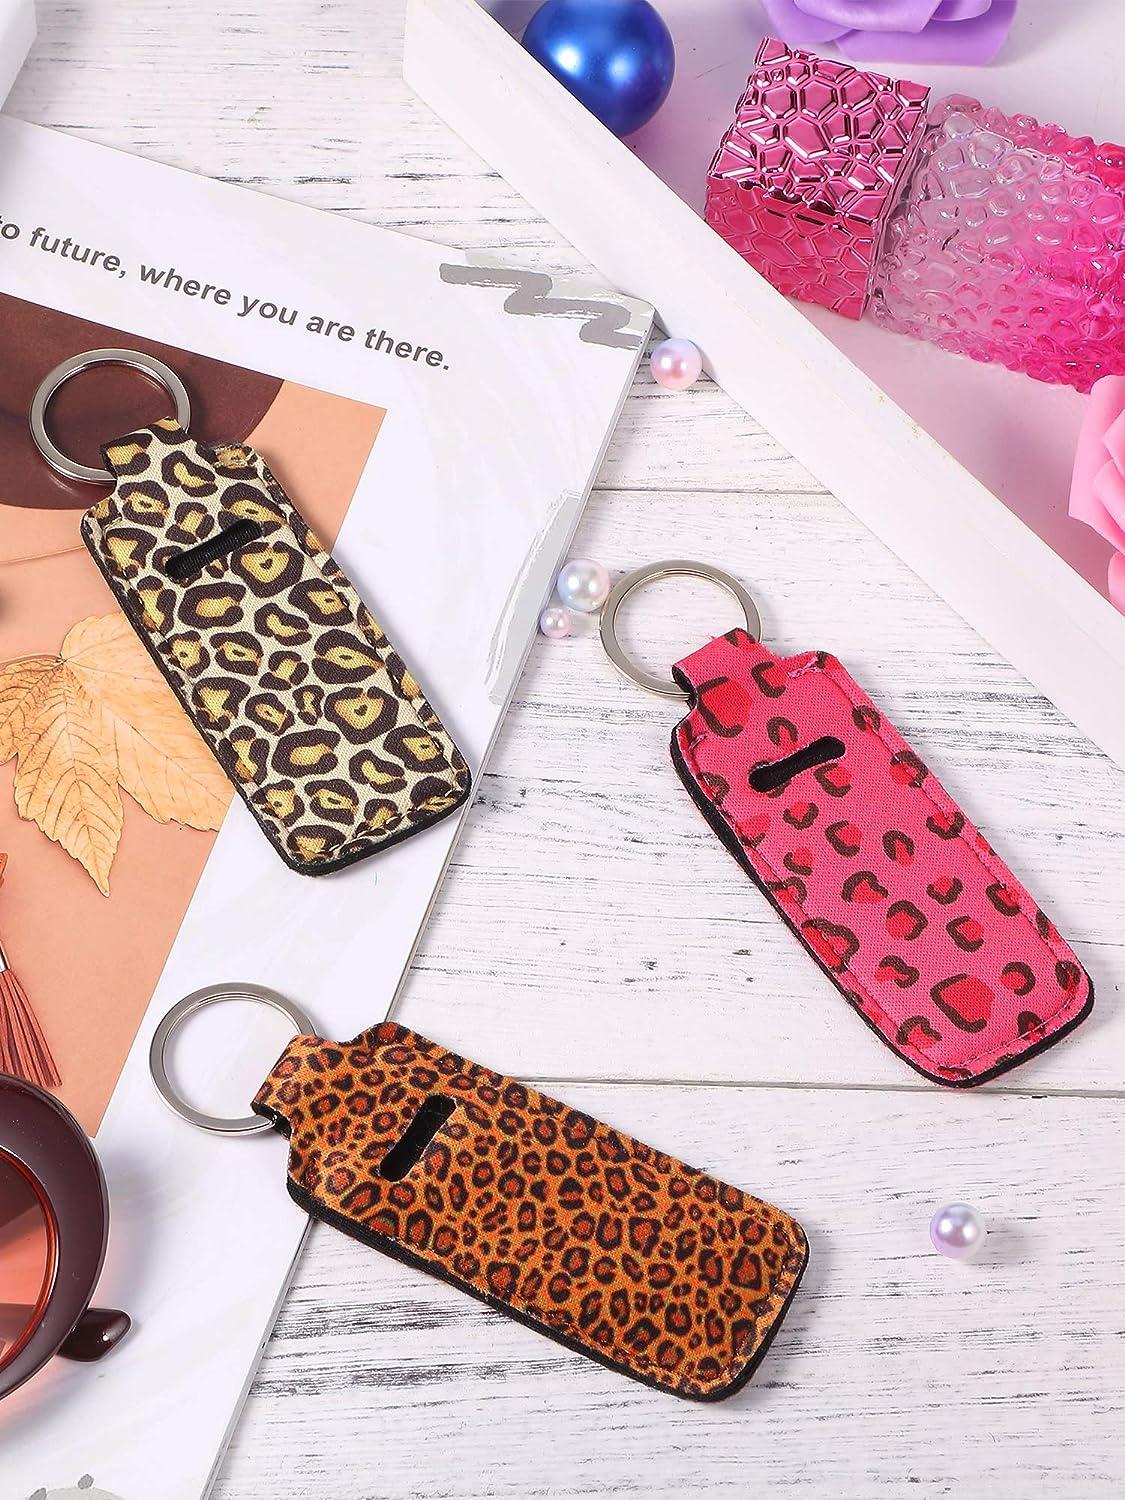  10 Pieces Cow Print Lipstick Holder Lipstick Holder Keychain  Sleeve Lipstick Pouch Lip Balm Holder Sleeve with 10 Metal Key Chains to  hold Travel Daily Accessories, Leopard Style : Beauty